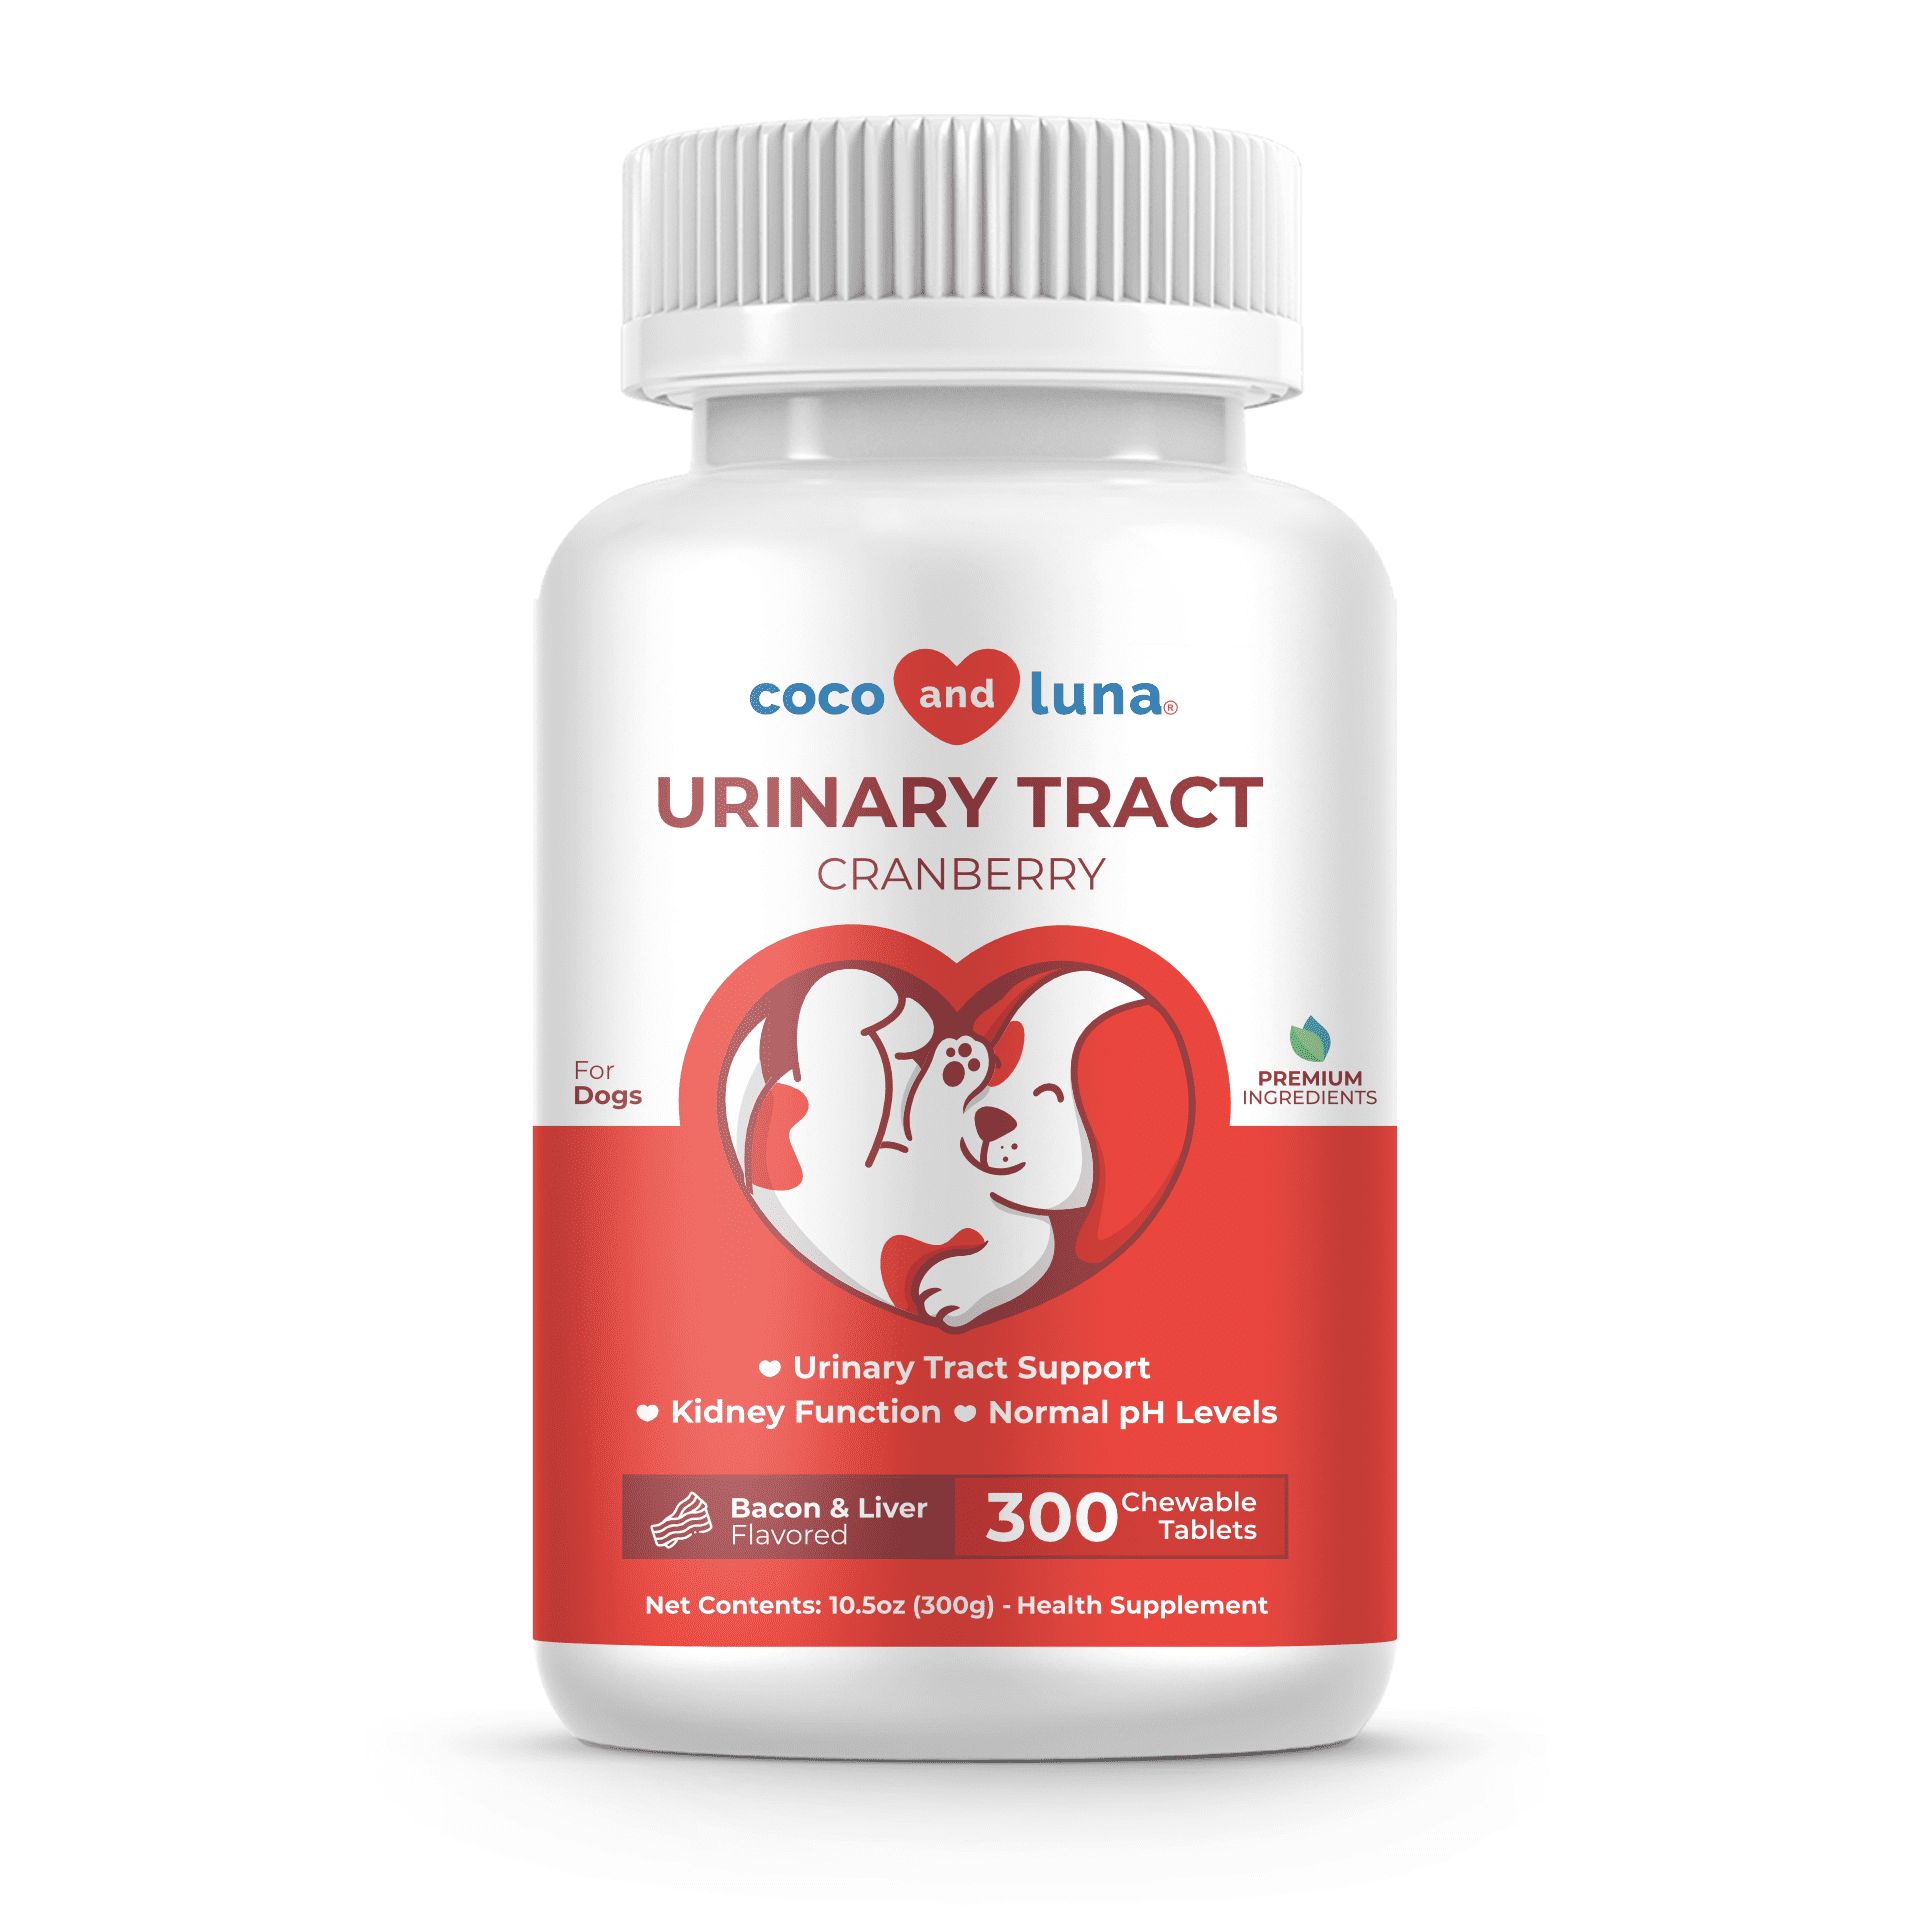 Urinary Tract Support for Dogs  - 300 Chewable Tablets - Coco and Luna